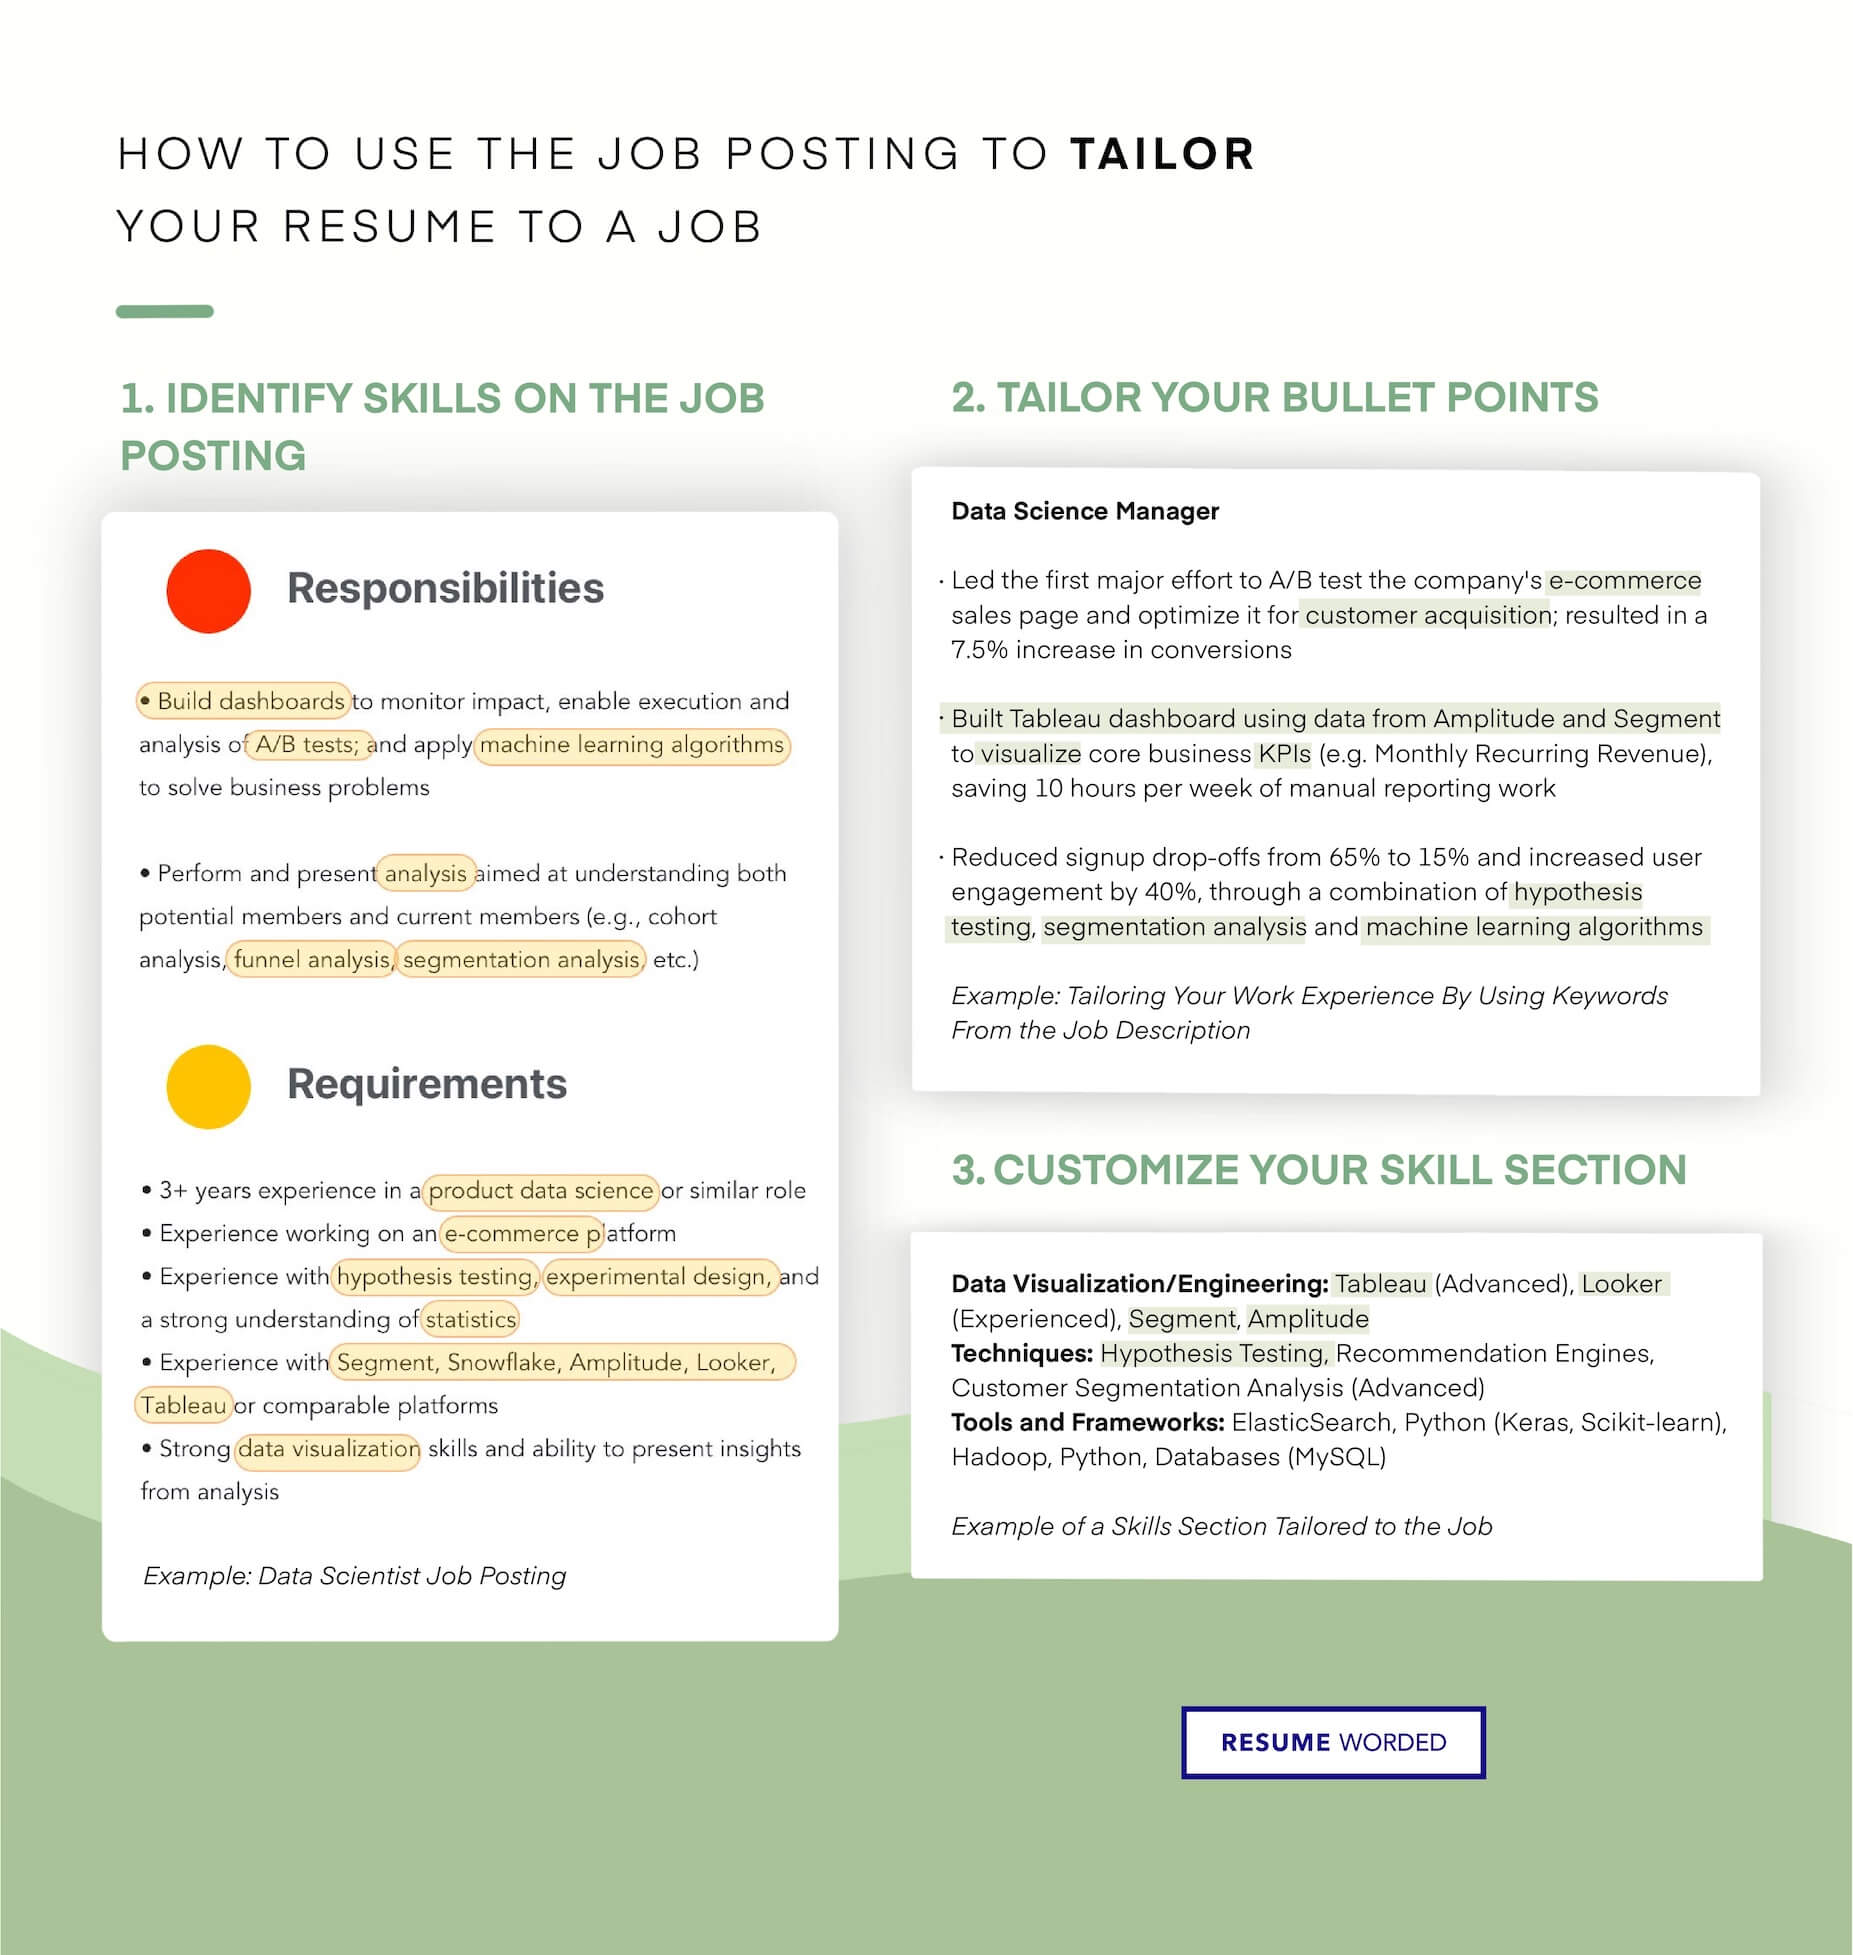 Tailor your resume to the chemistry field. - Quality Control Chemist Resume